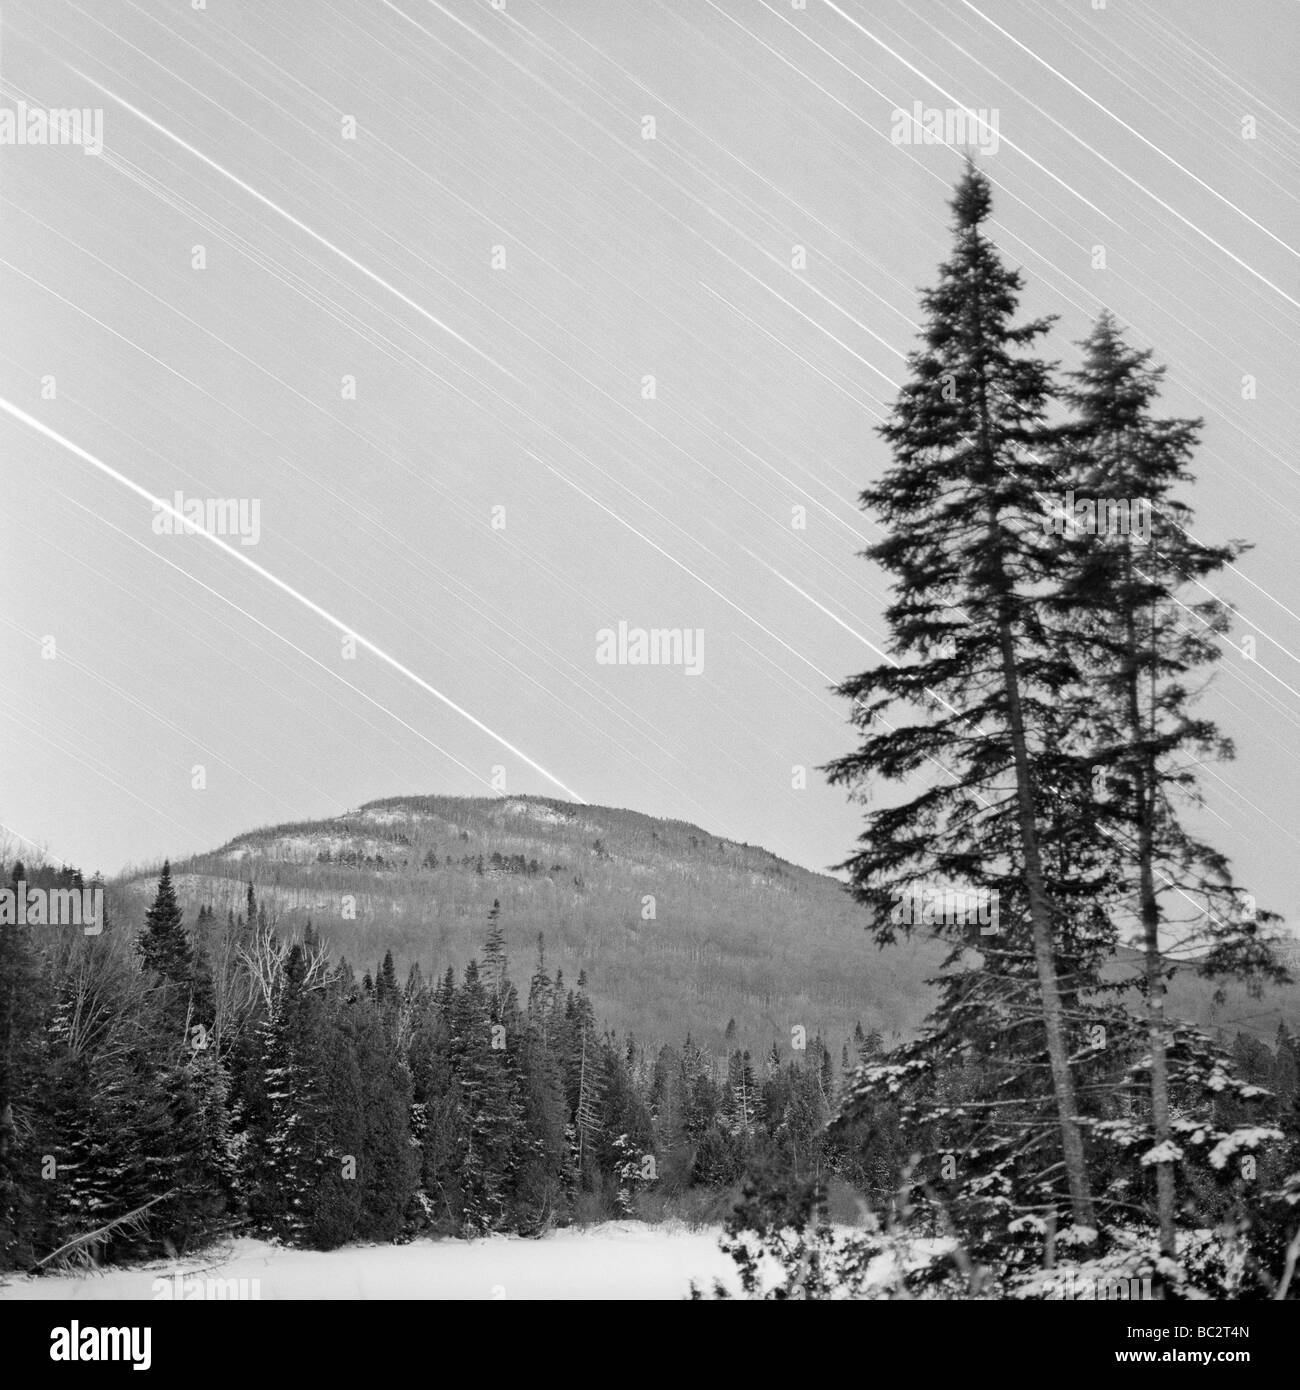 Winter landscape at night with star tracks over the sky Stock Photo